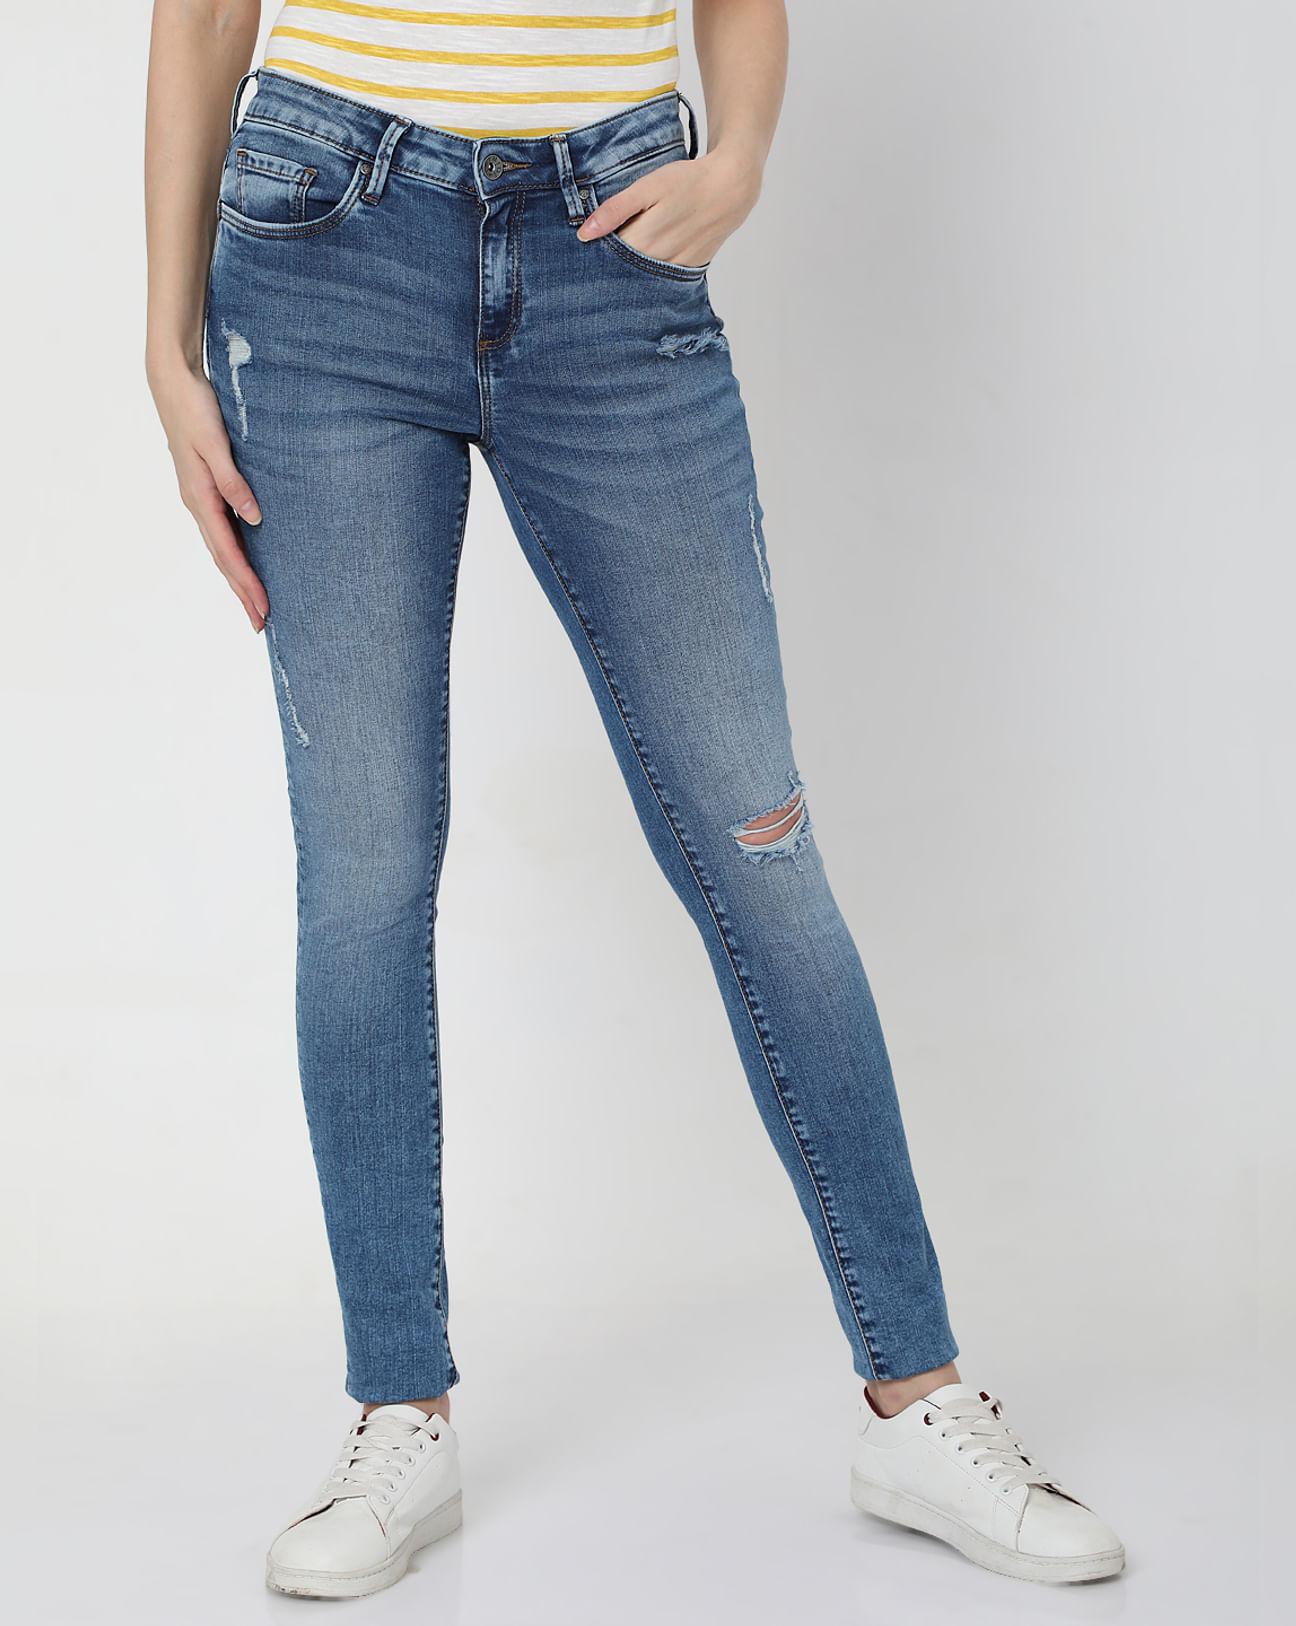 blue mid rise pushup skinny jeans